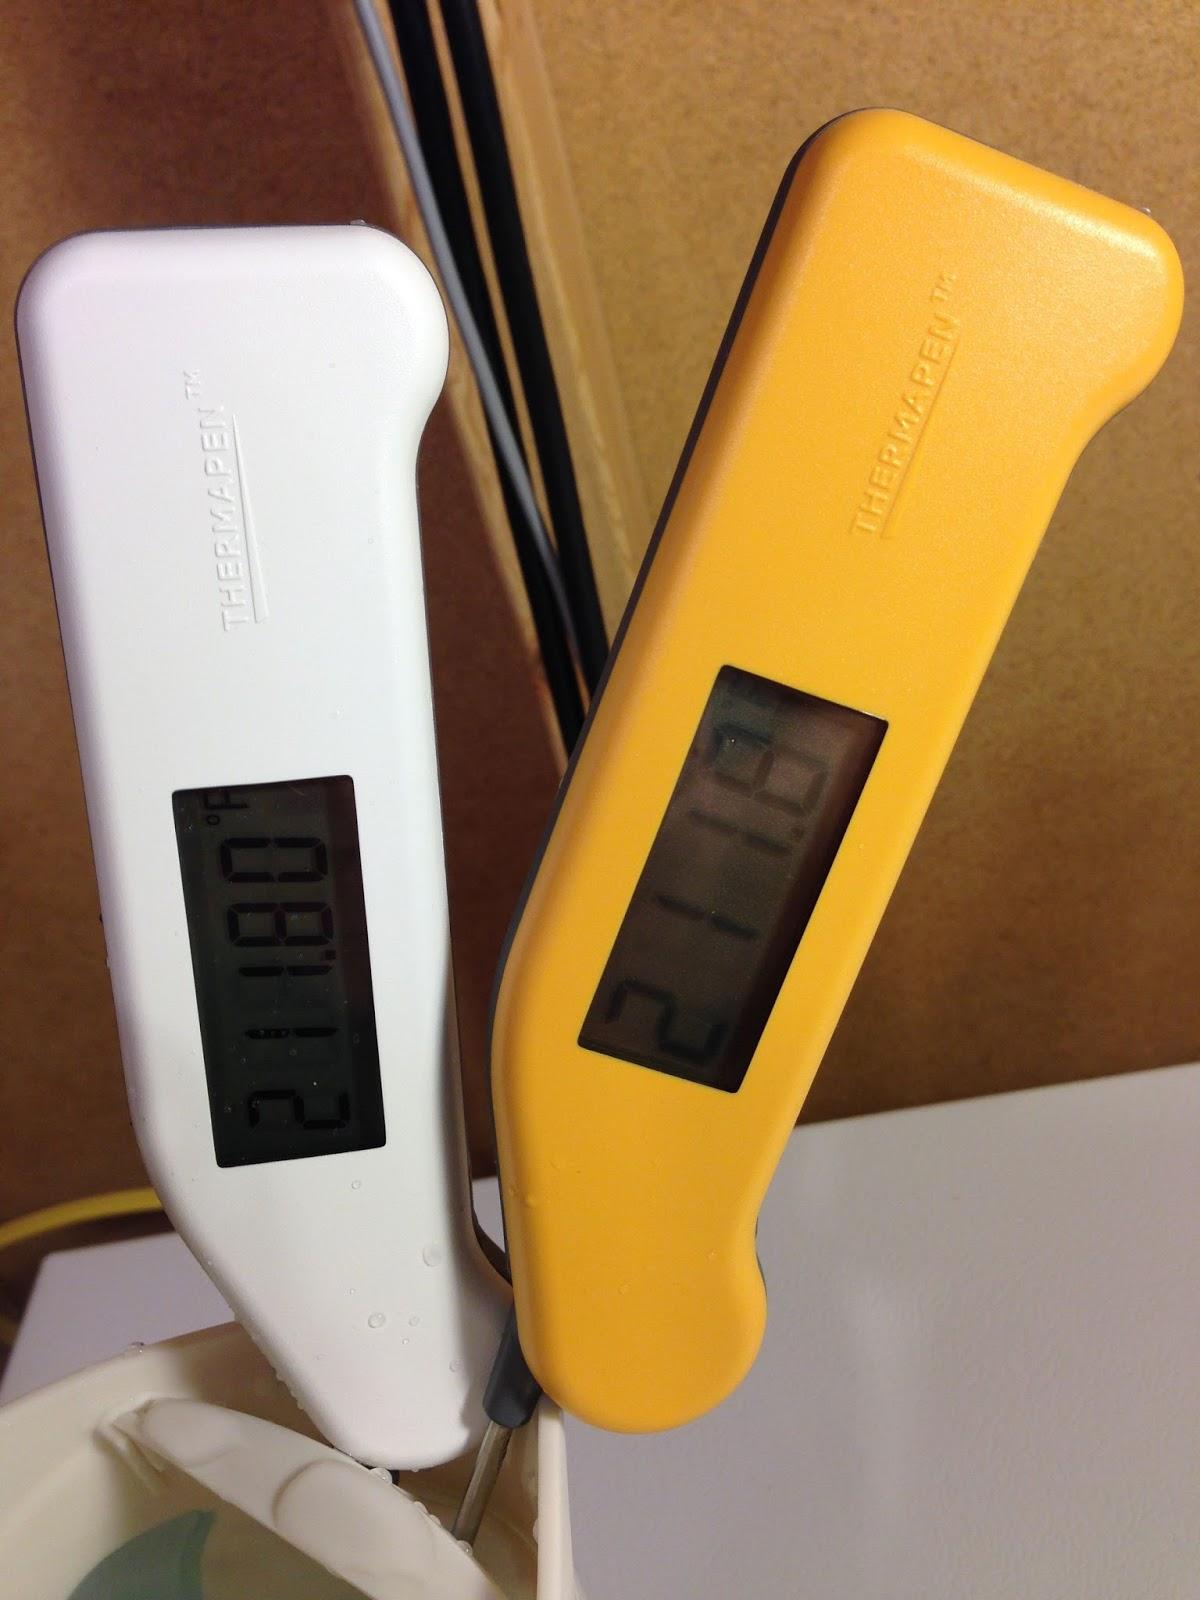 Hands On Review: ThermoWorks Classic Thermapen